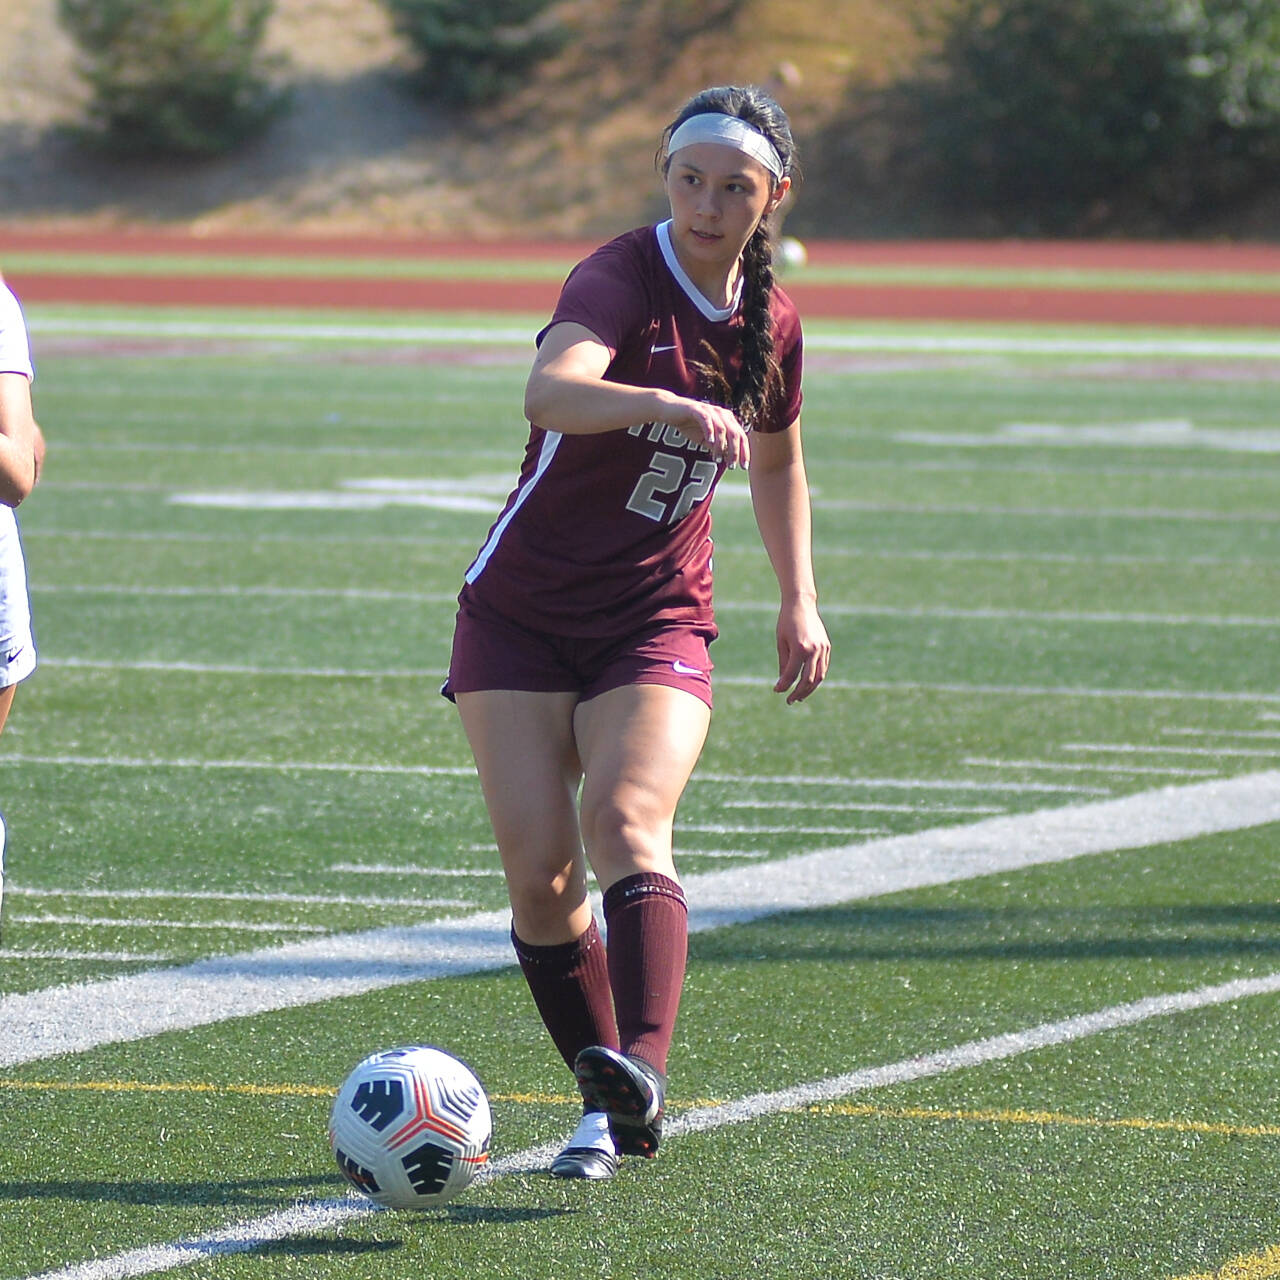 DAILY WORLD FILE PHOTO Montesano’s Bethanie Henderson had two goals and an assist in a 5-0 win over Castle Rock on Tuesday at Castle Rock High School.